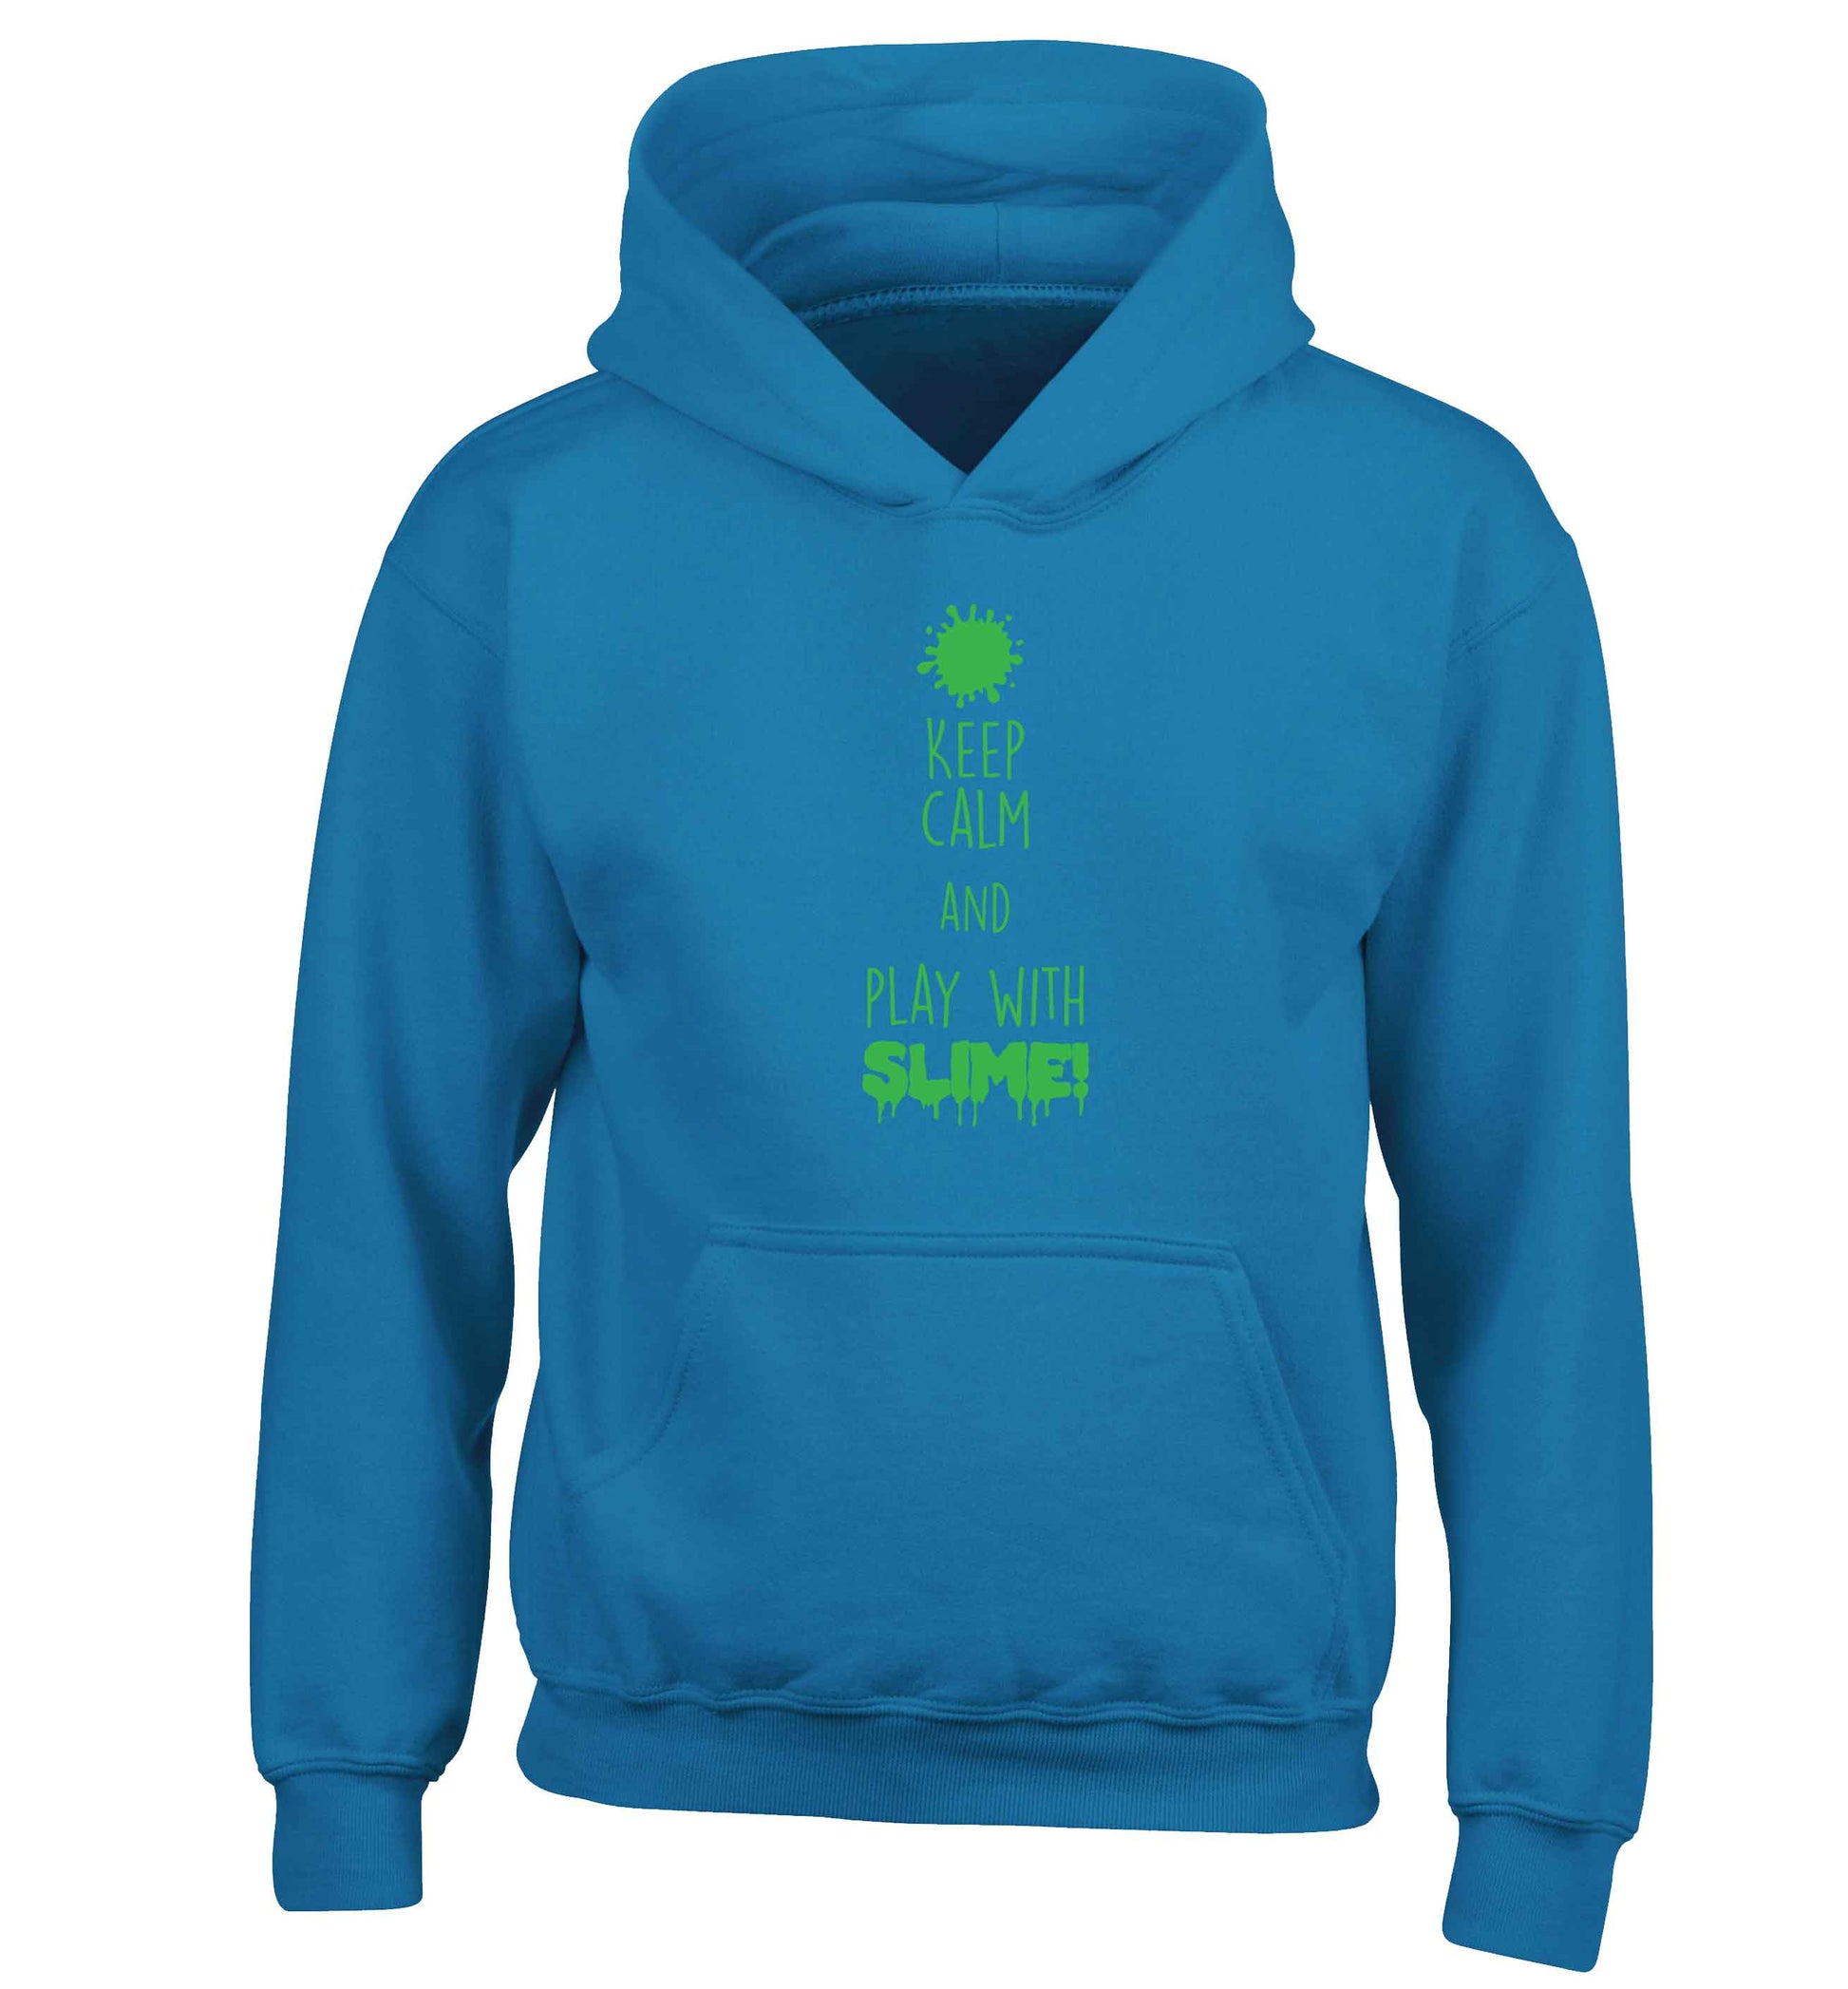 Neon green keep calm and play with slime!children's blue hoodie 12-13 Years